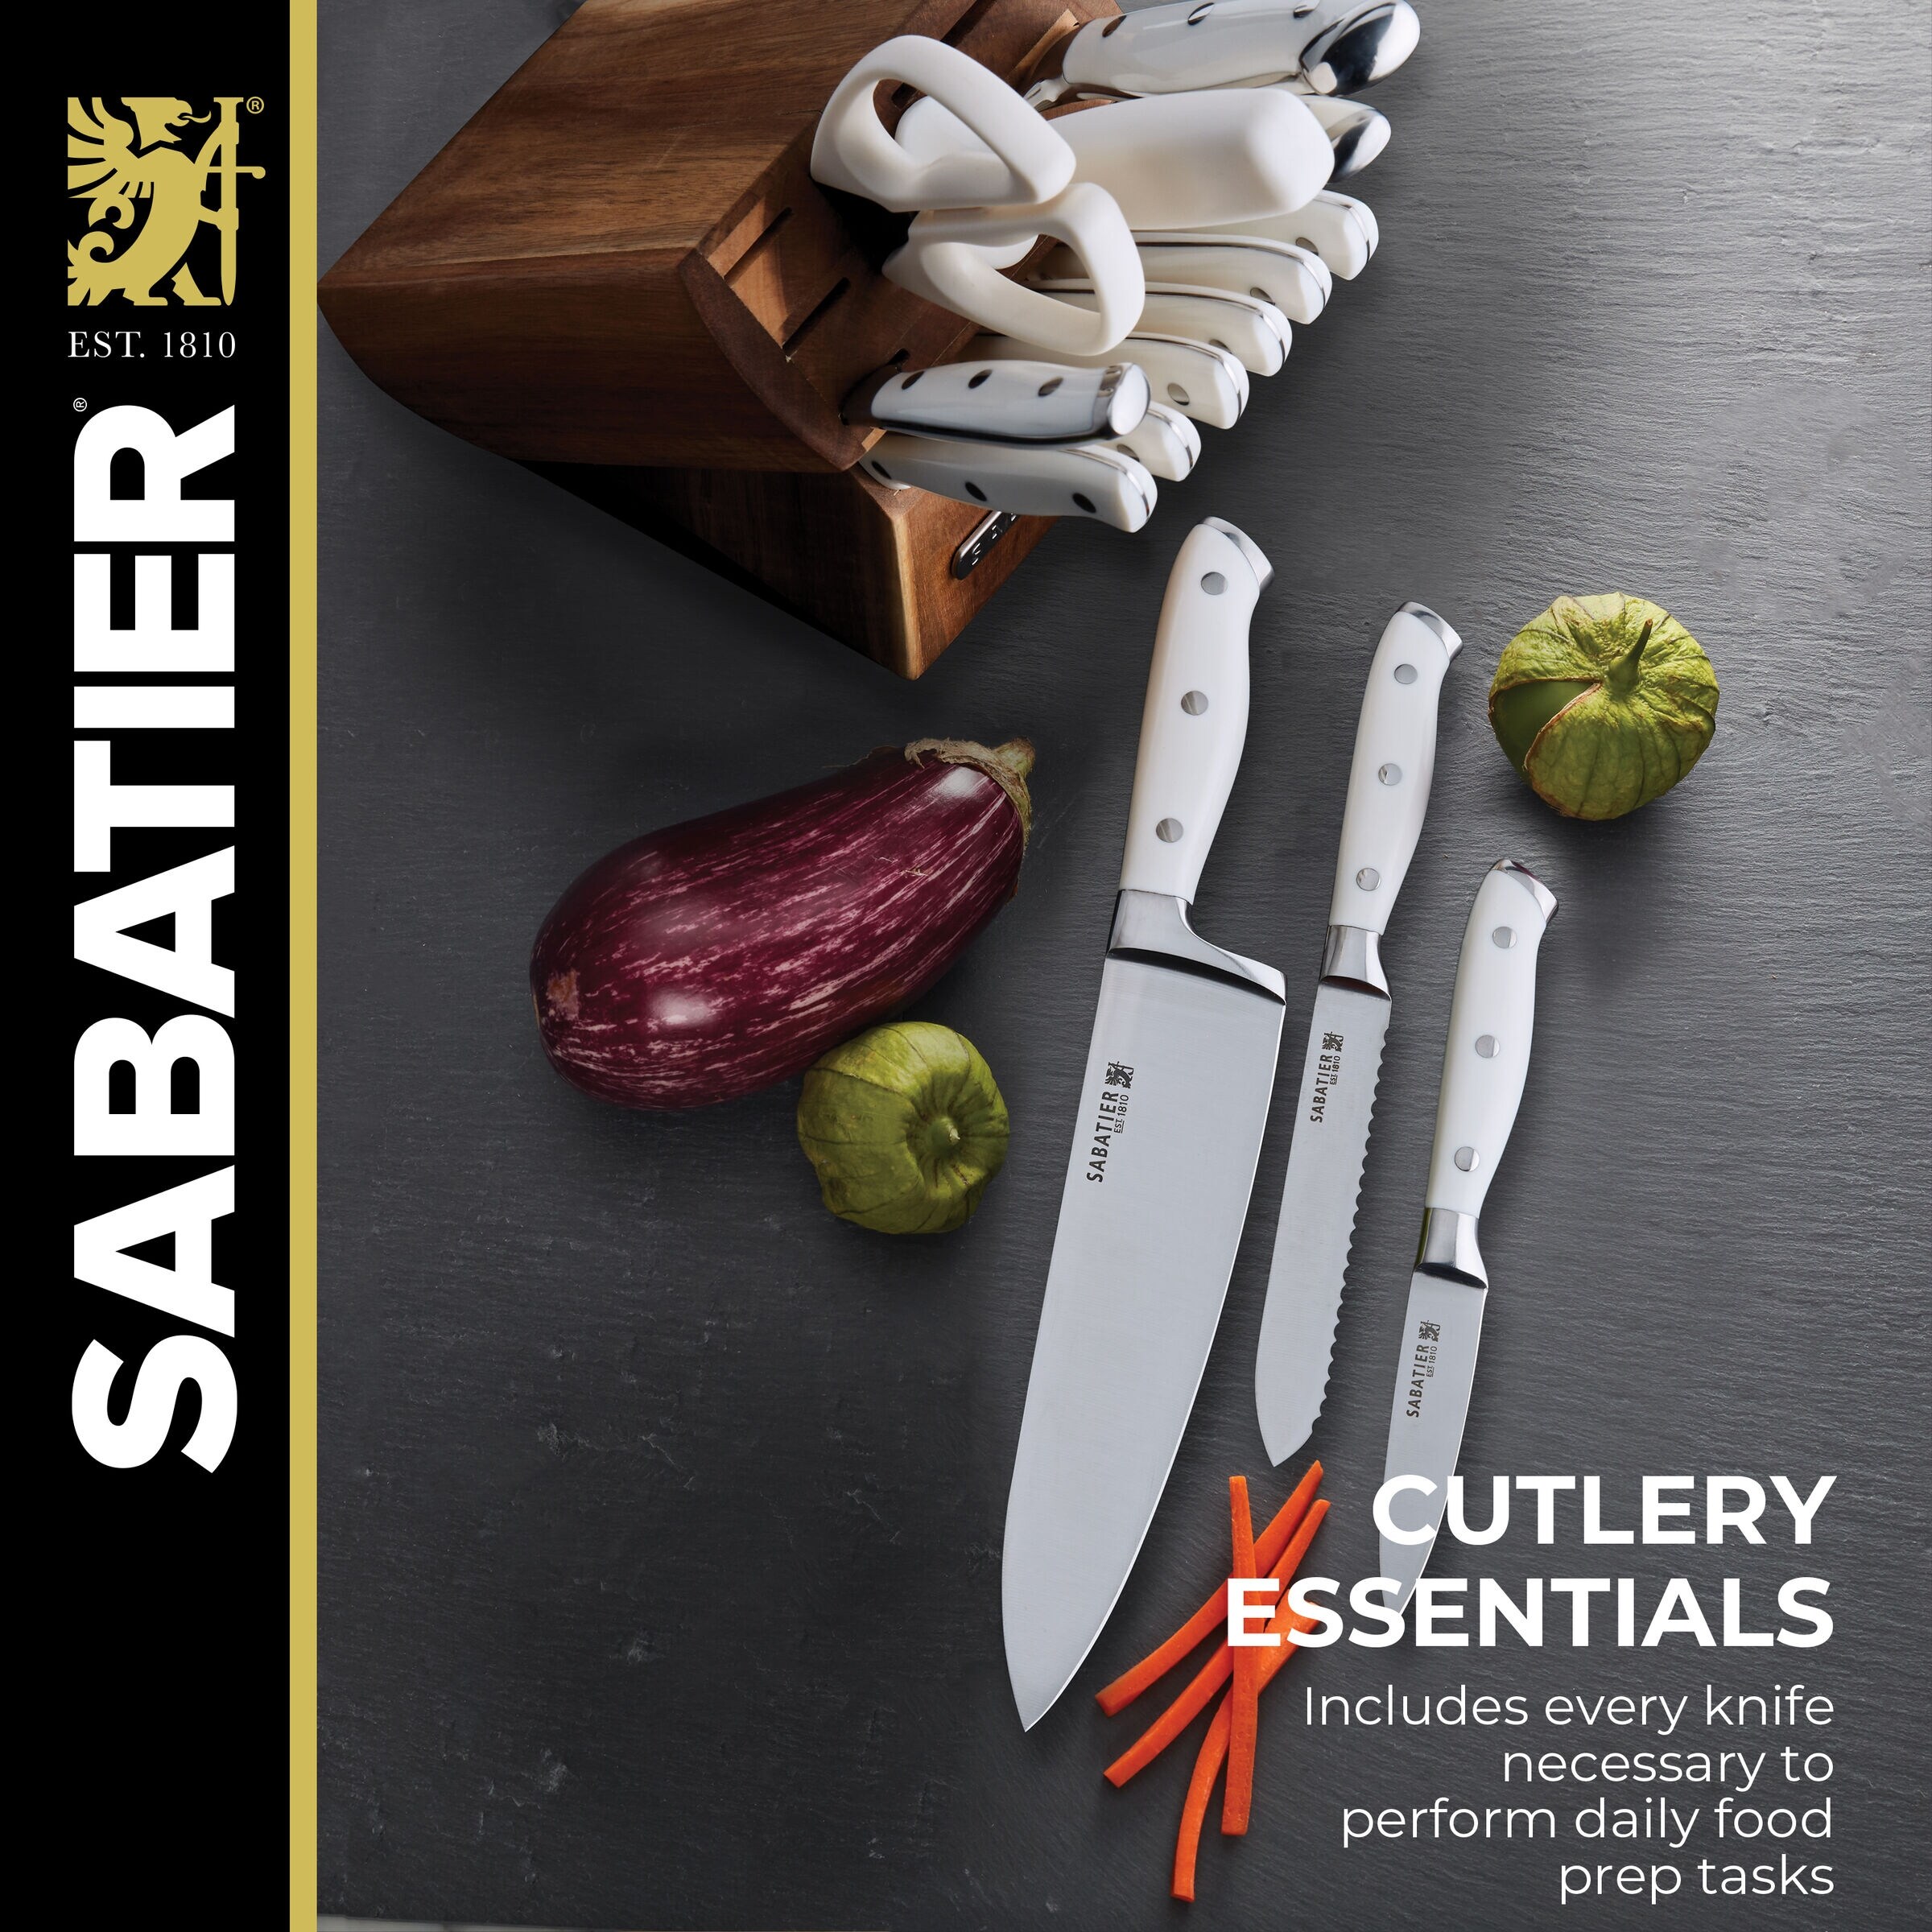 https://ak1.ostkcdn.com/images/products/is/images/direct/c73aebf6a85798b4ff937bdb15ef1262989edf63/Sabatier-15-Piece-White-Forged-Triple-Rivet-Cutlery-Set-with-Acacia-Block.jpg